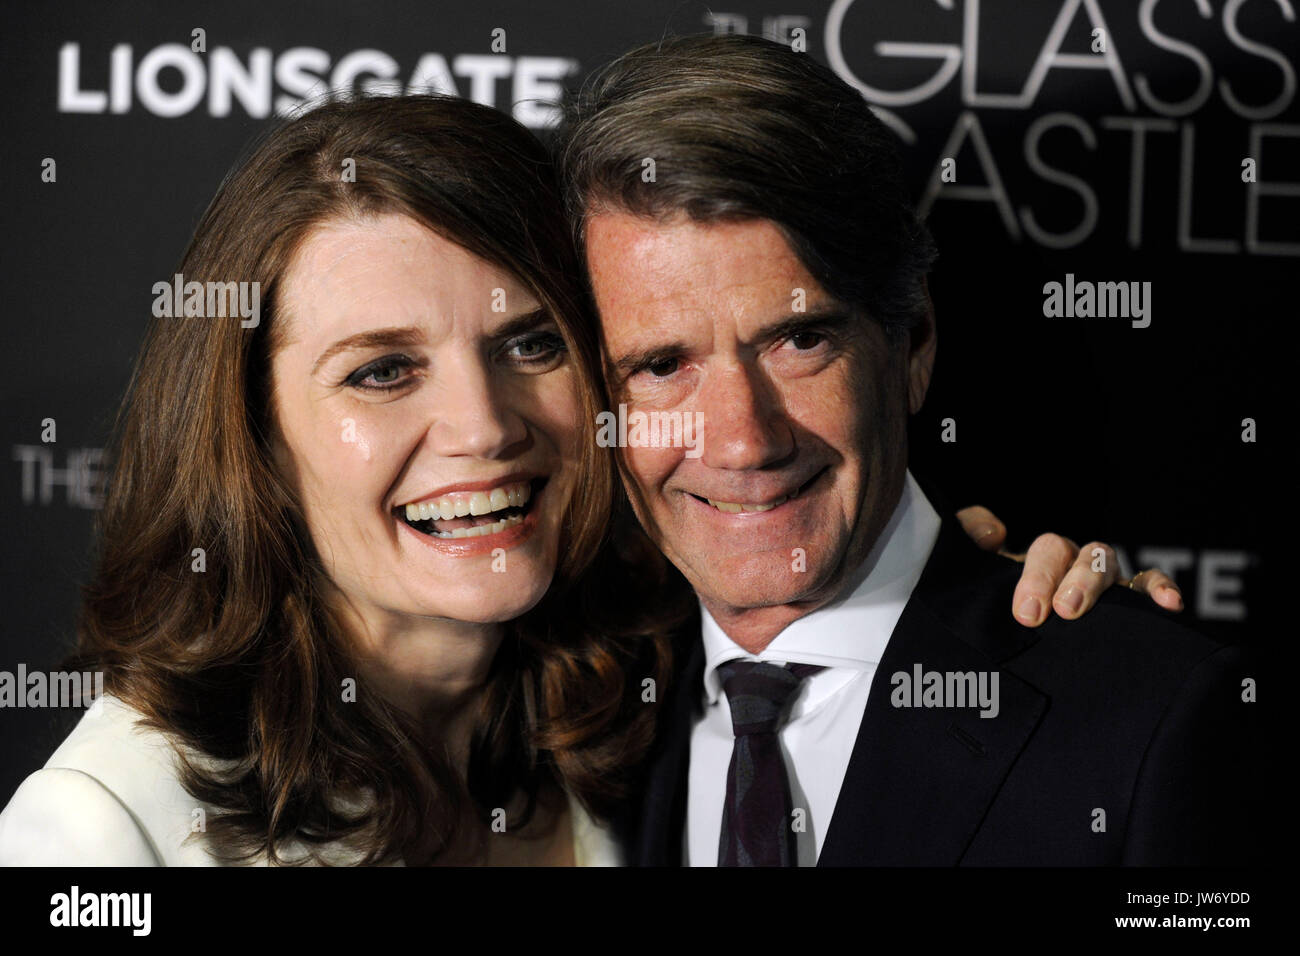 Jeannette Walls and John Taylor attend 'The Glass Castle' New York screening at SVA Theatre on August 9, 2017 in New York City. Stock Photo